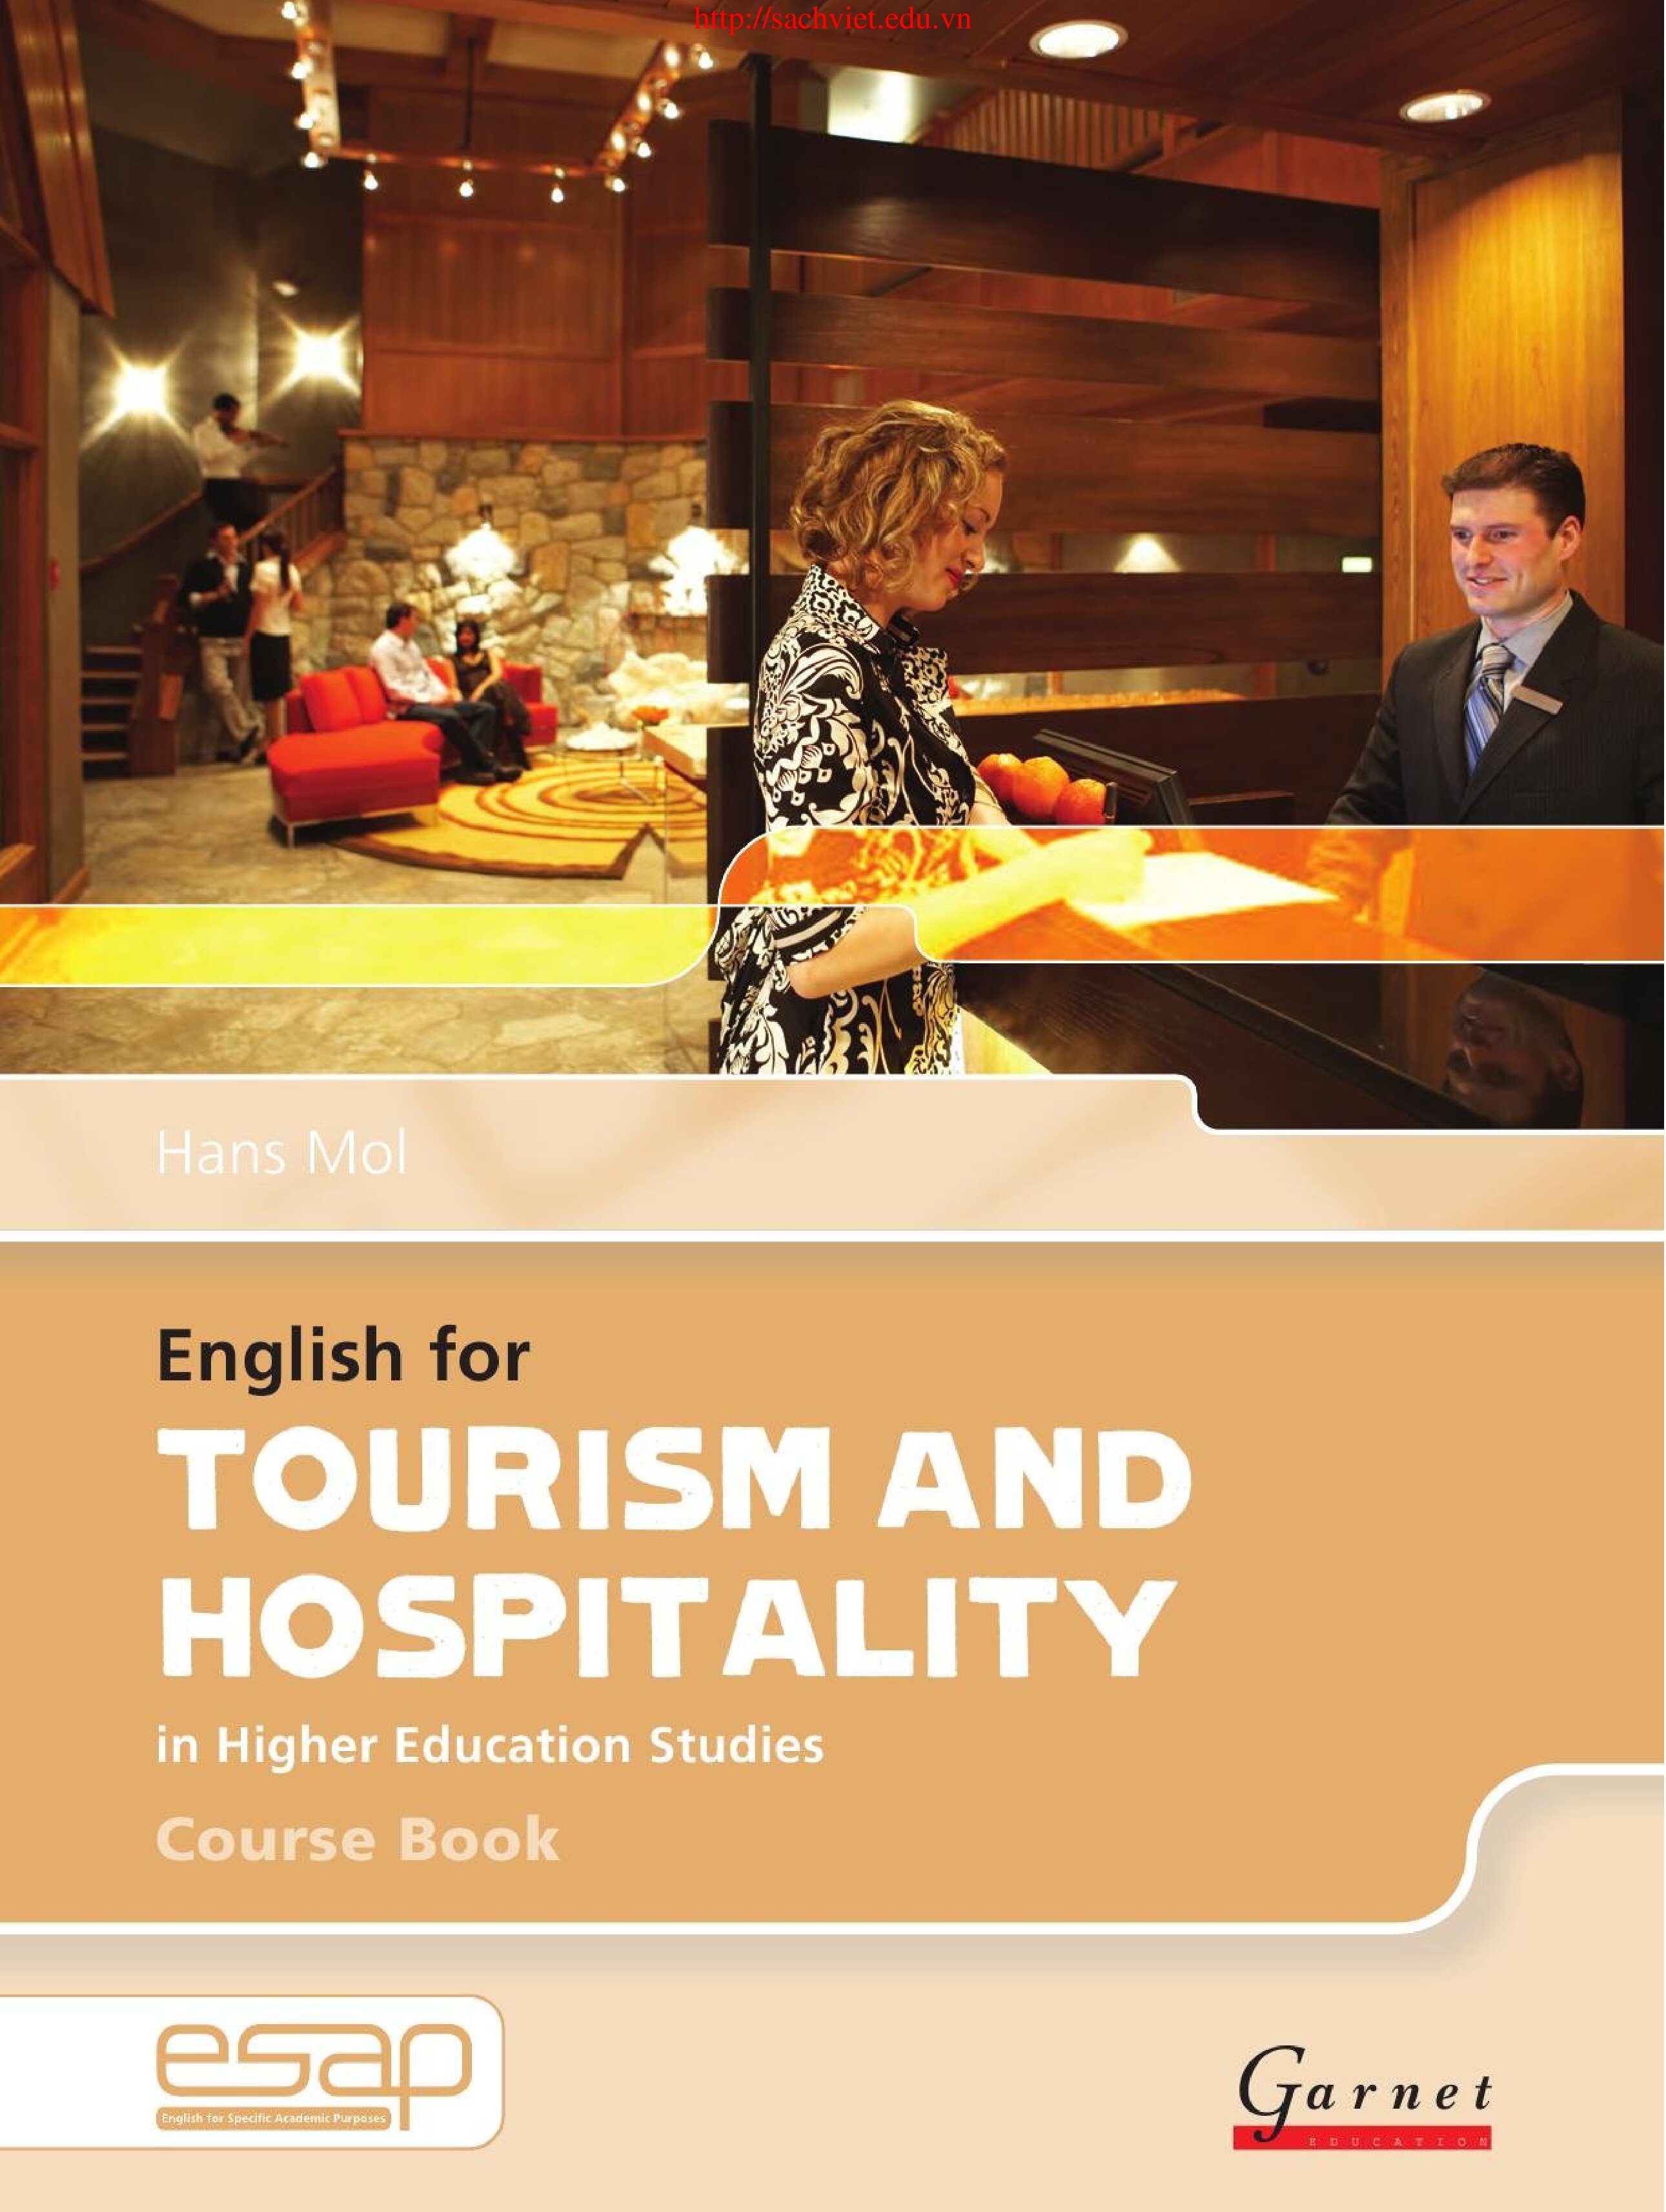 English for Tourism and Hospitality Course Book